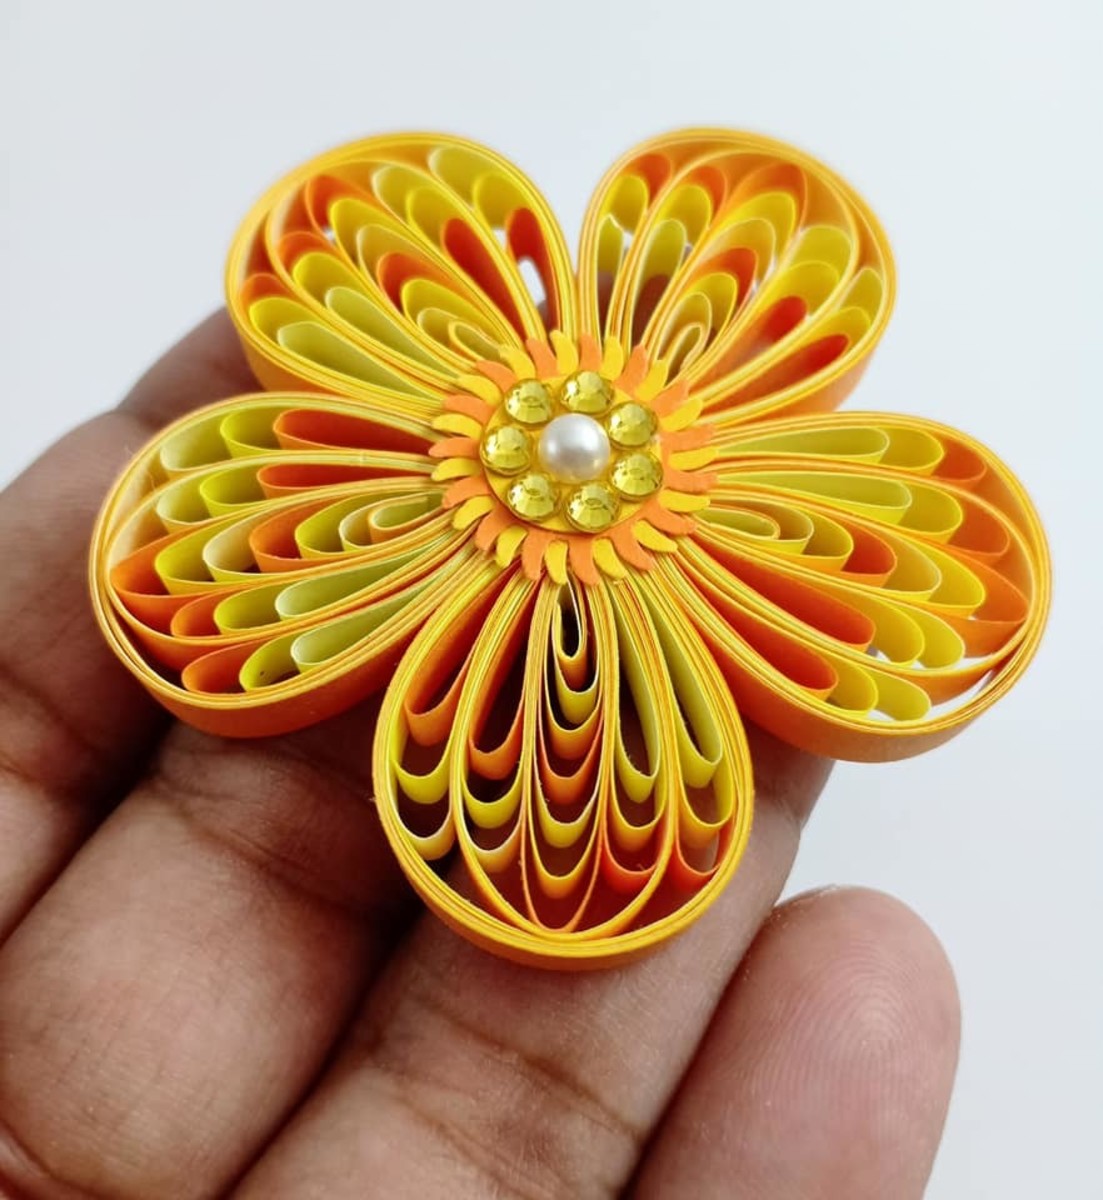 Quilled flowers are an amazing expression of color and form